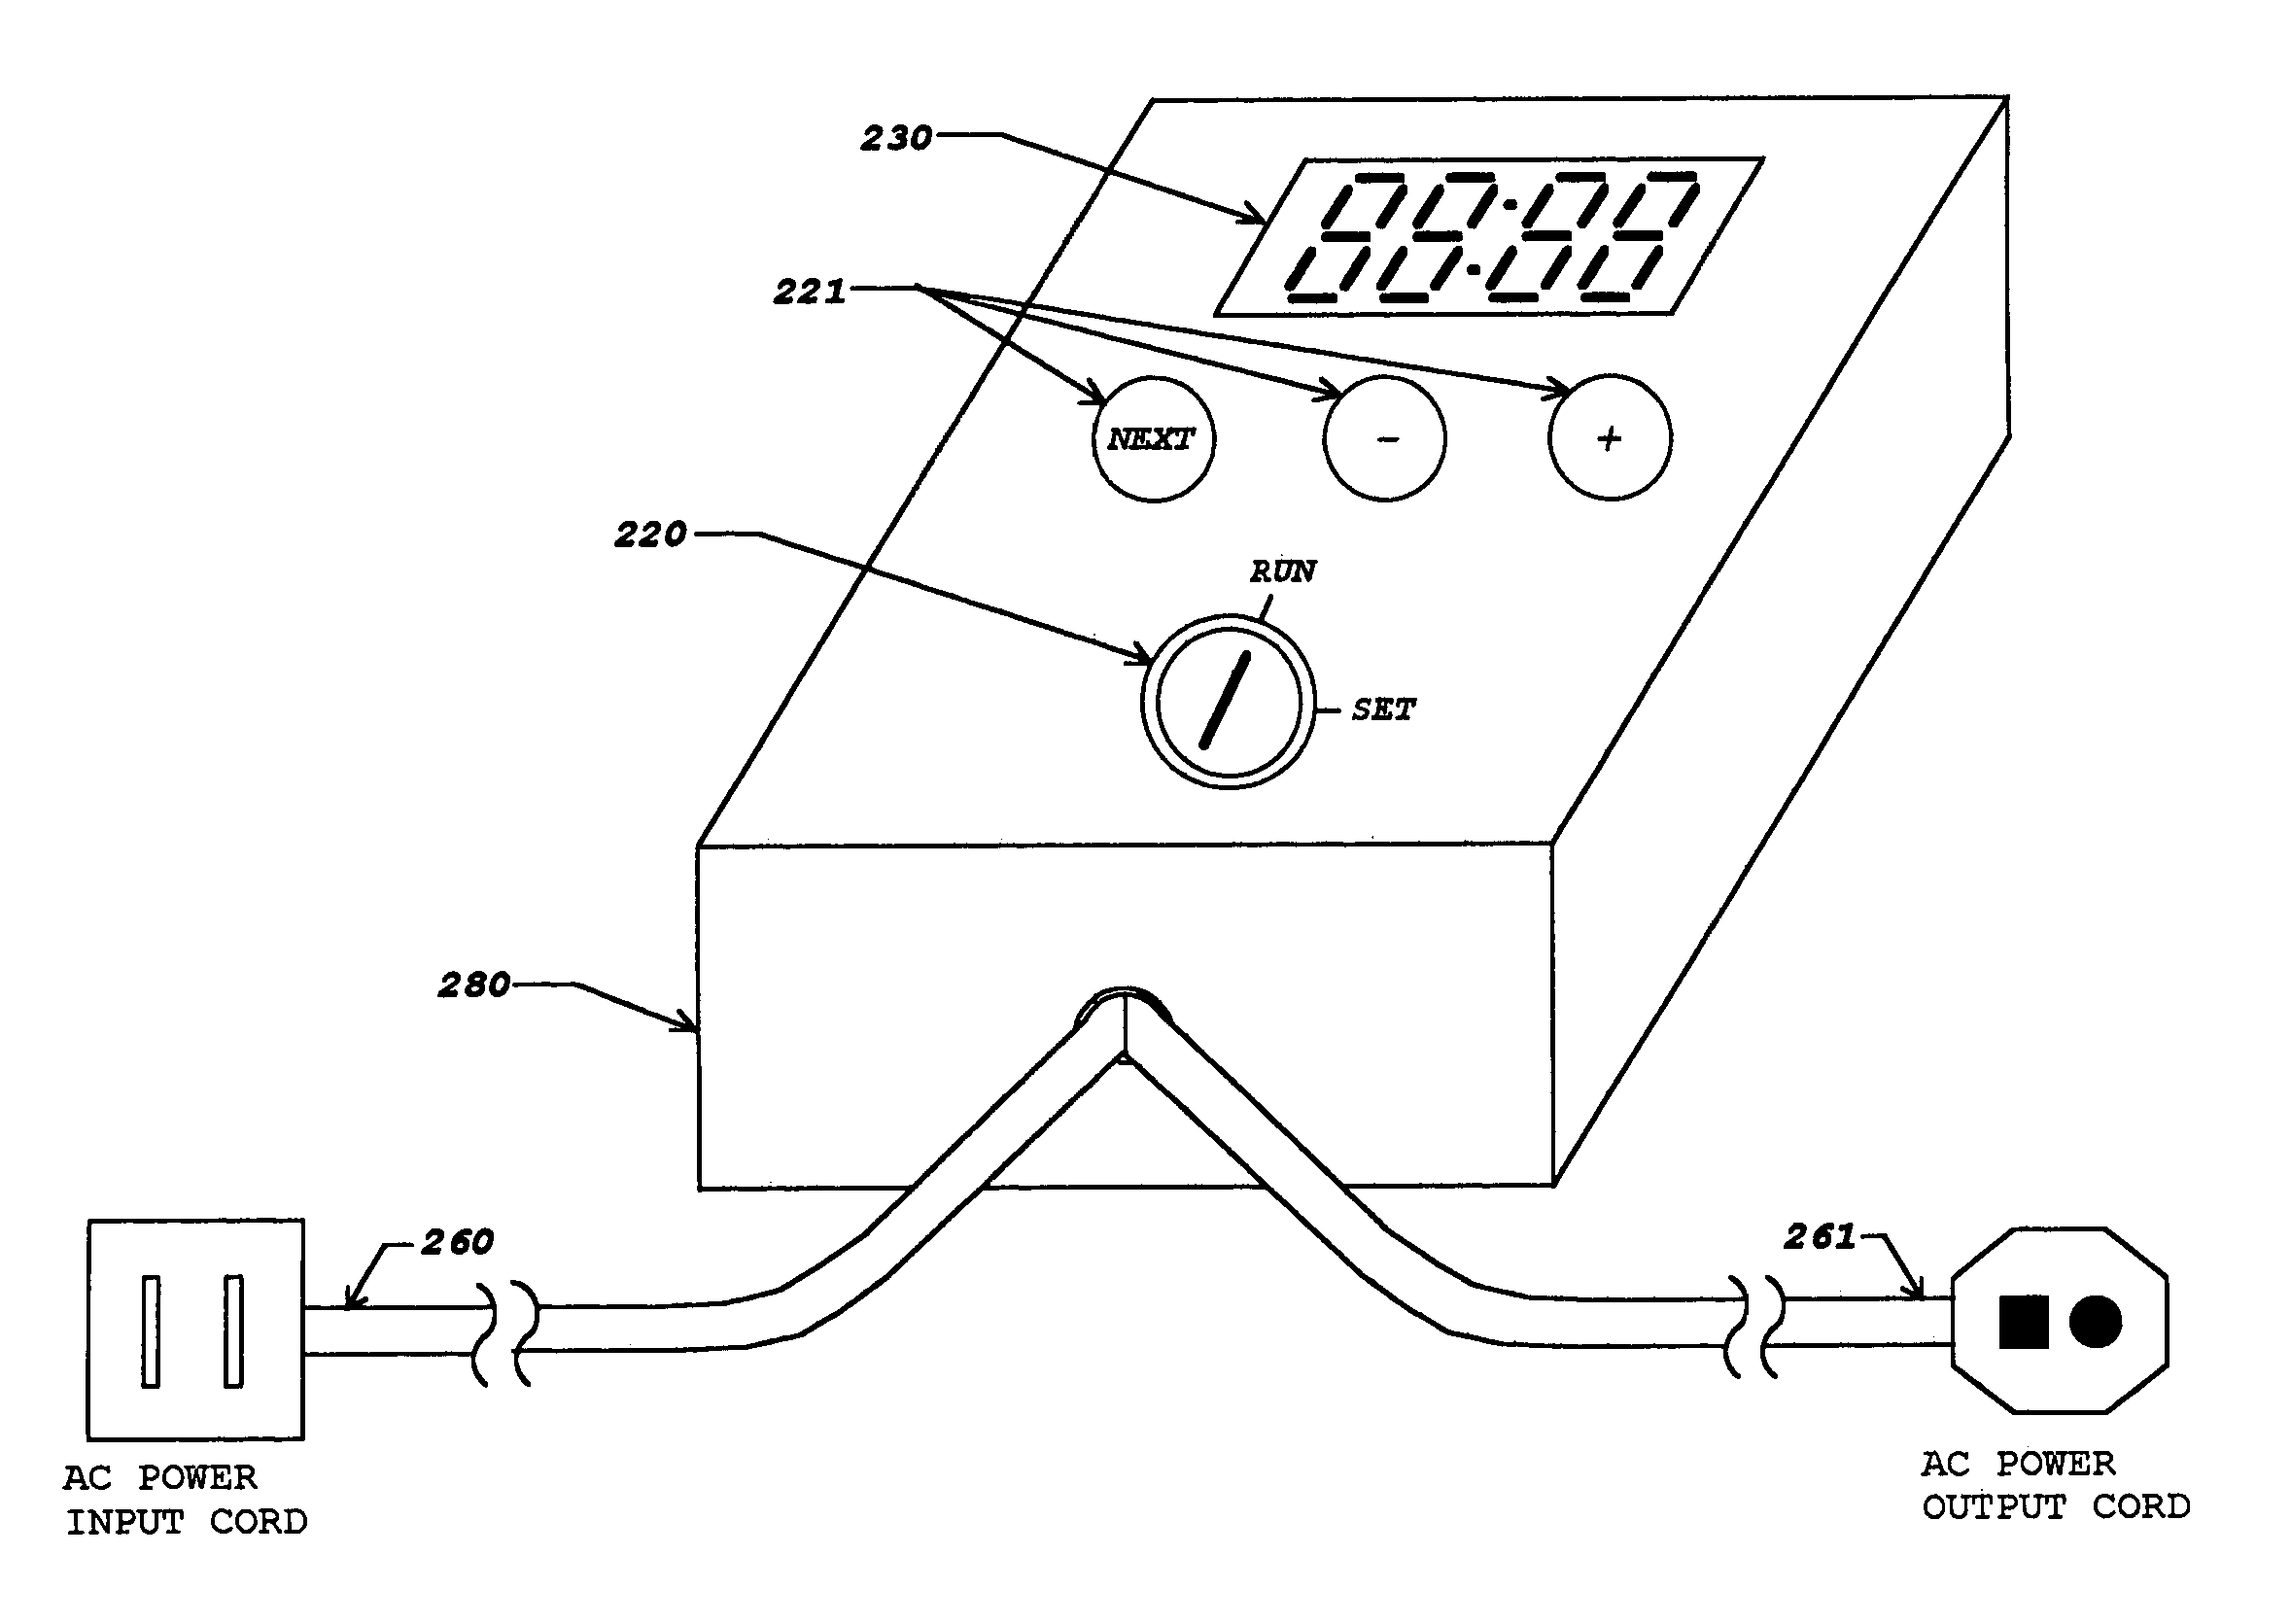 Apparatus which integrates a time control into a detachable power cord